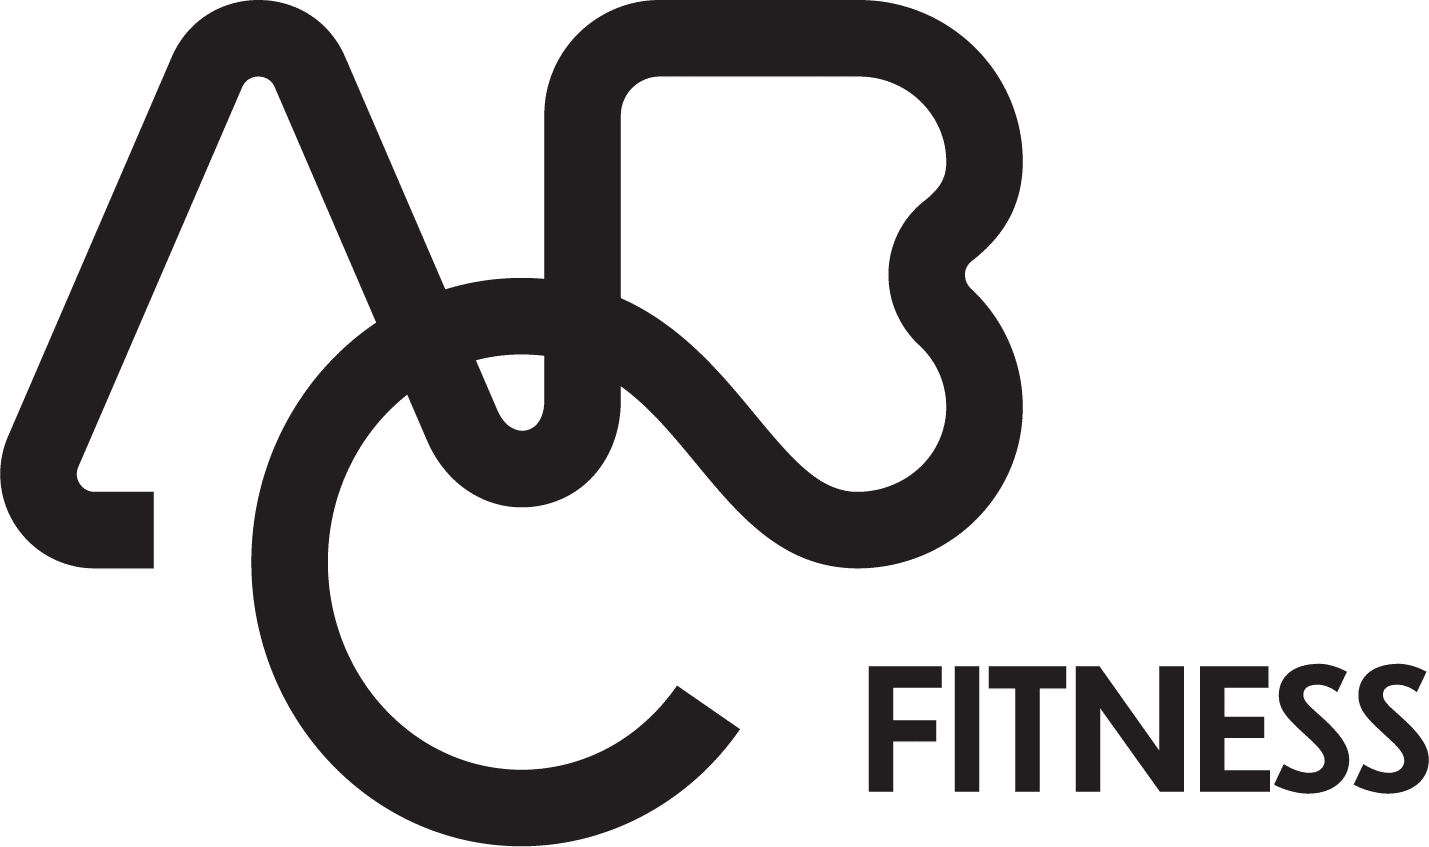 ABC Fitness Solutions logo